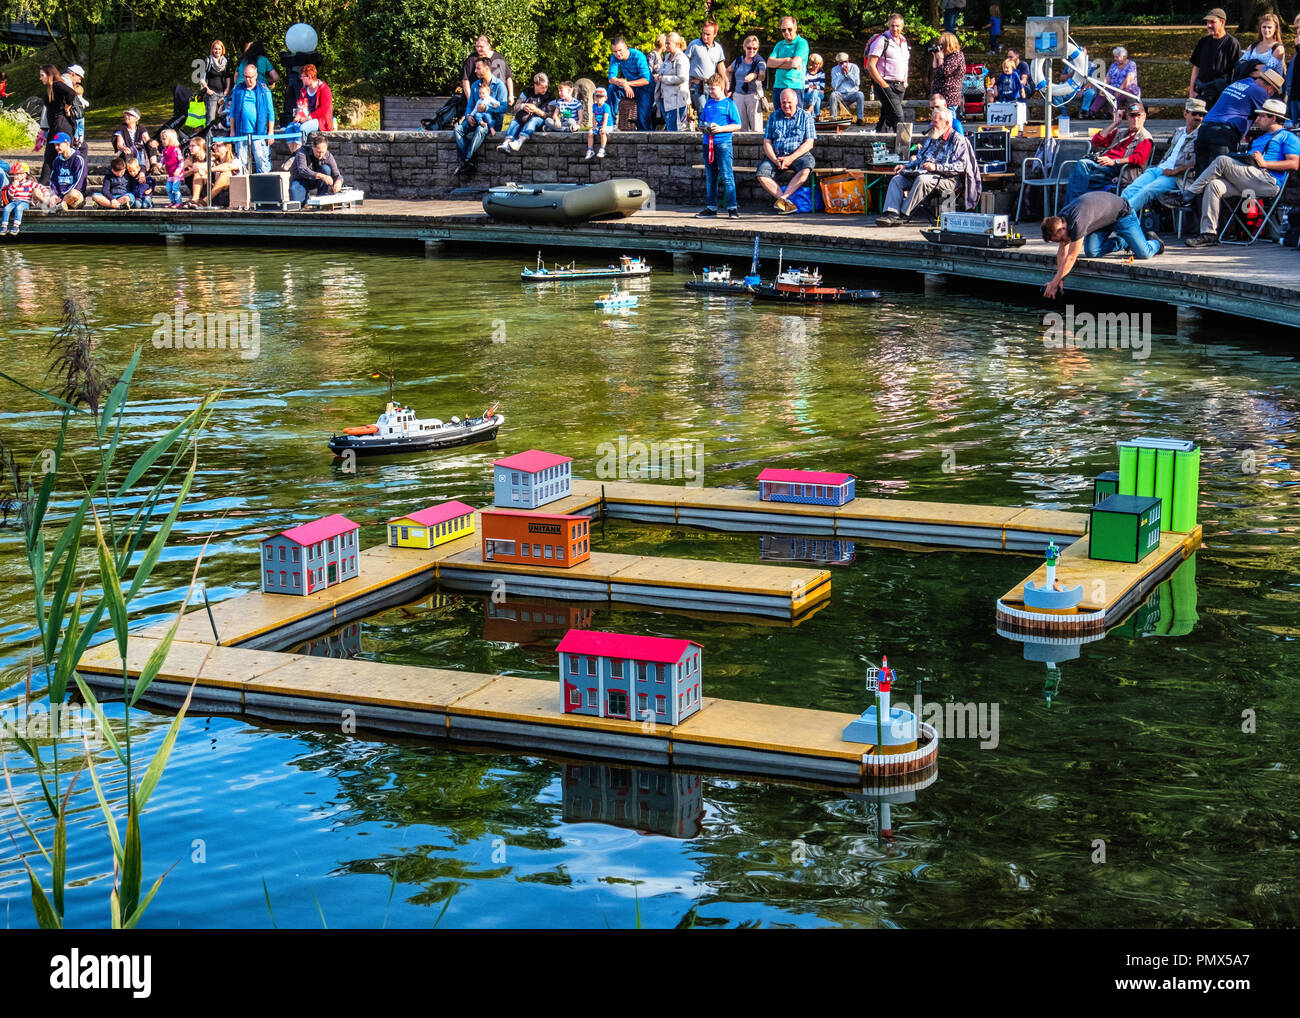 Berlin, Neukölln, Britzer Garden Families and children enjoy boating lake using boats with remote controls. Stock Photo